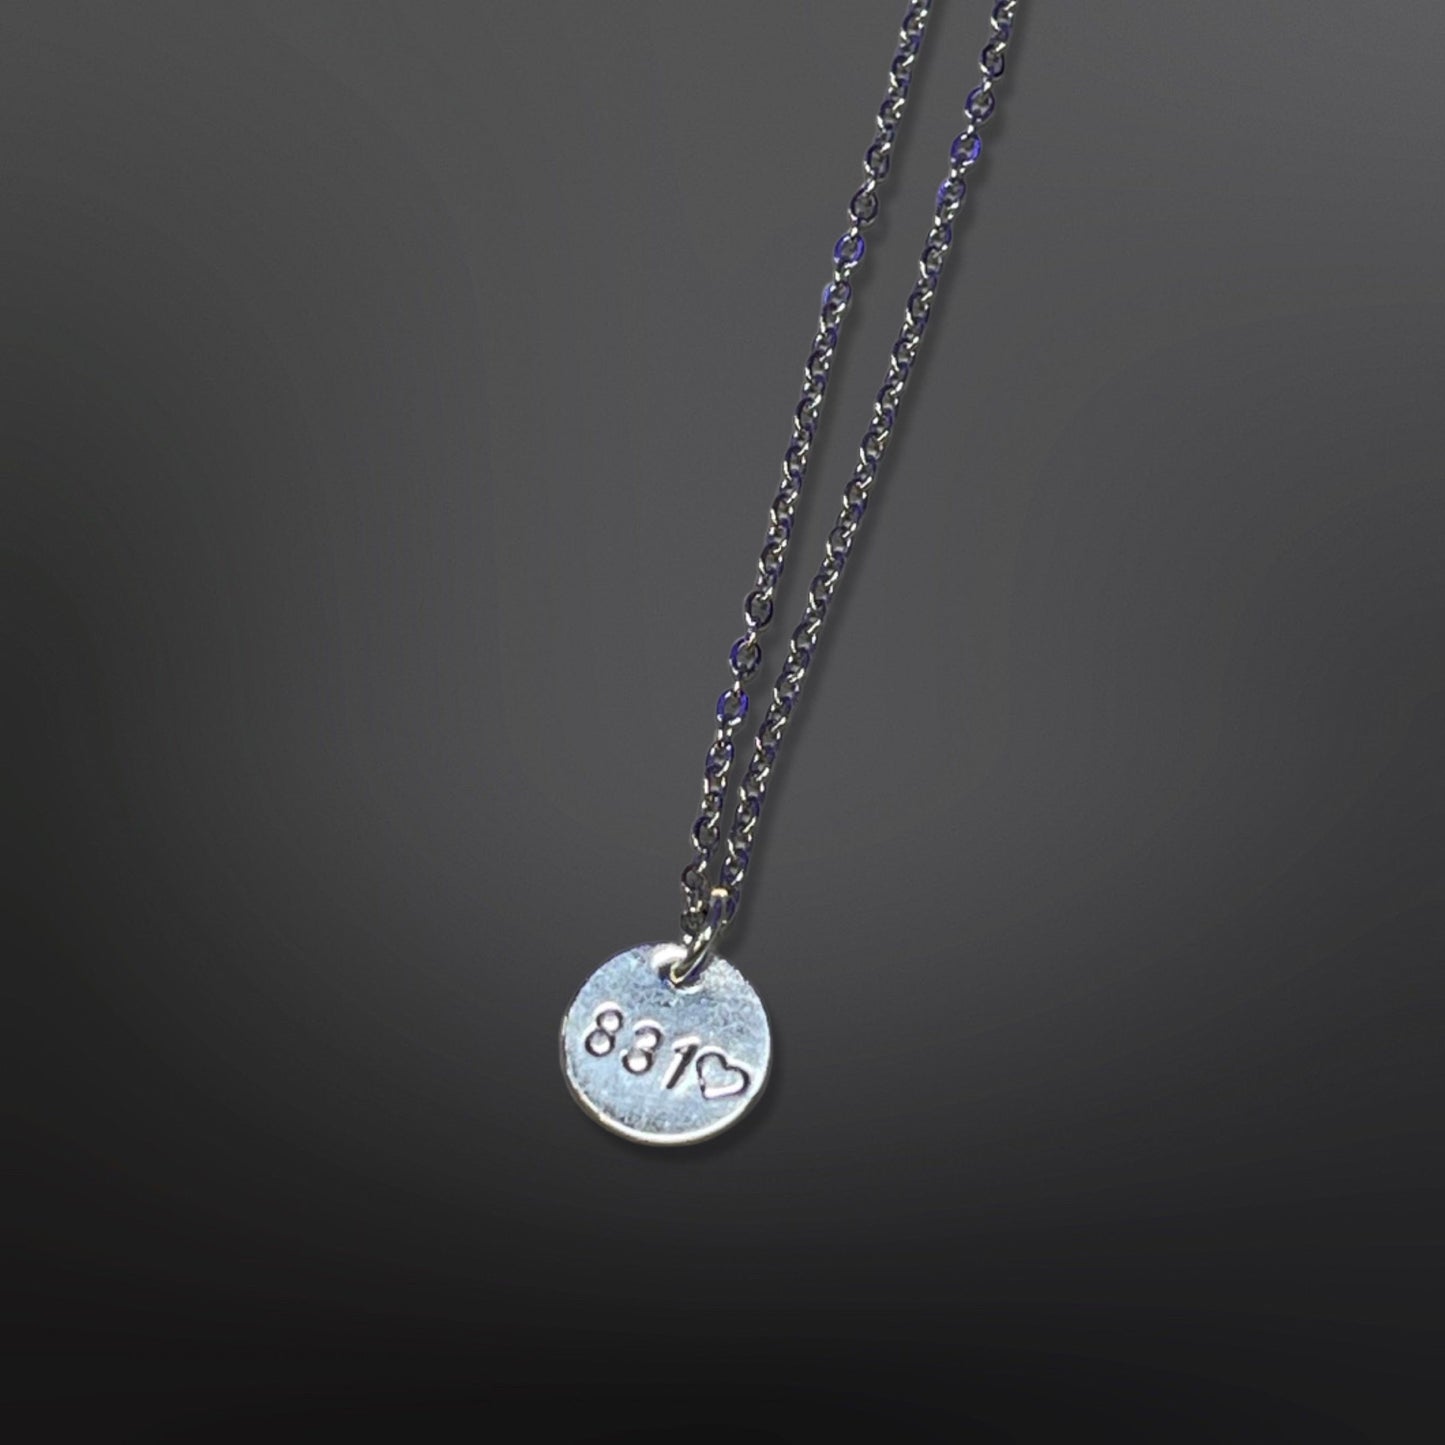 I Love You 831 Numbers Stamped Circle Necklace